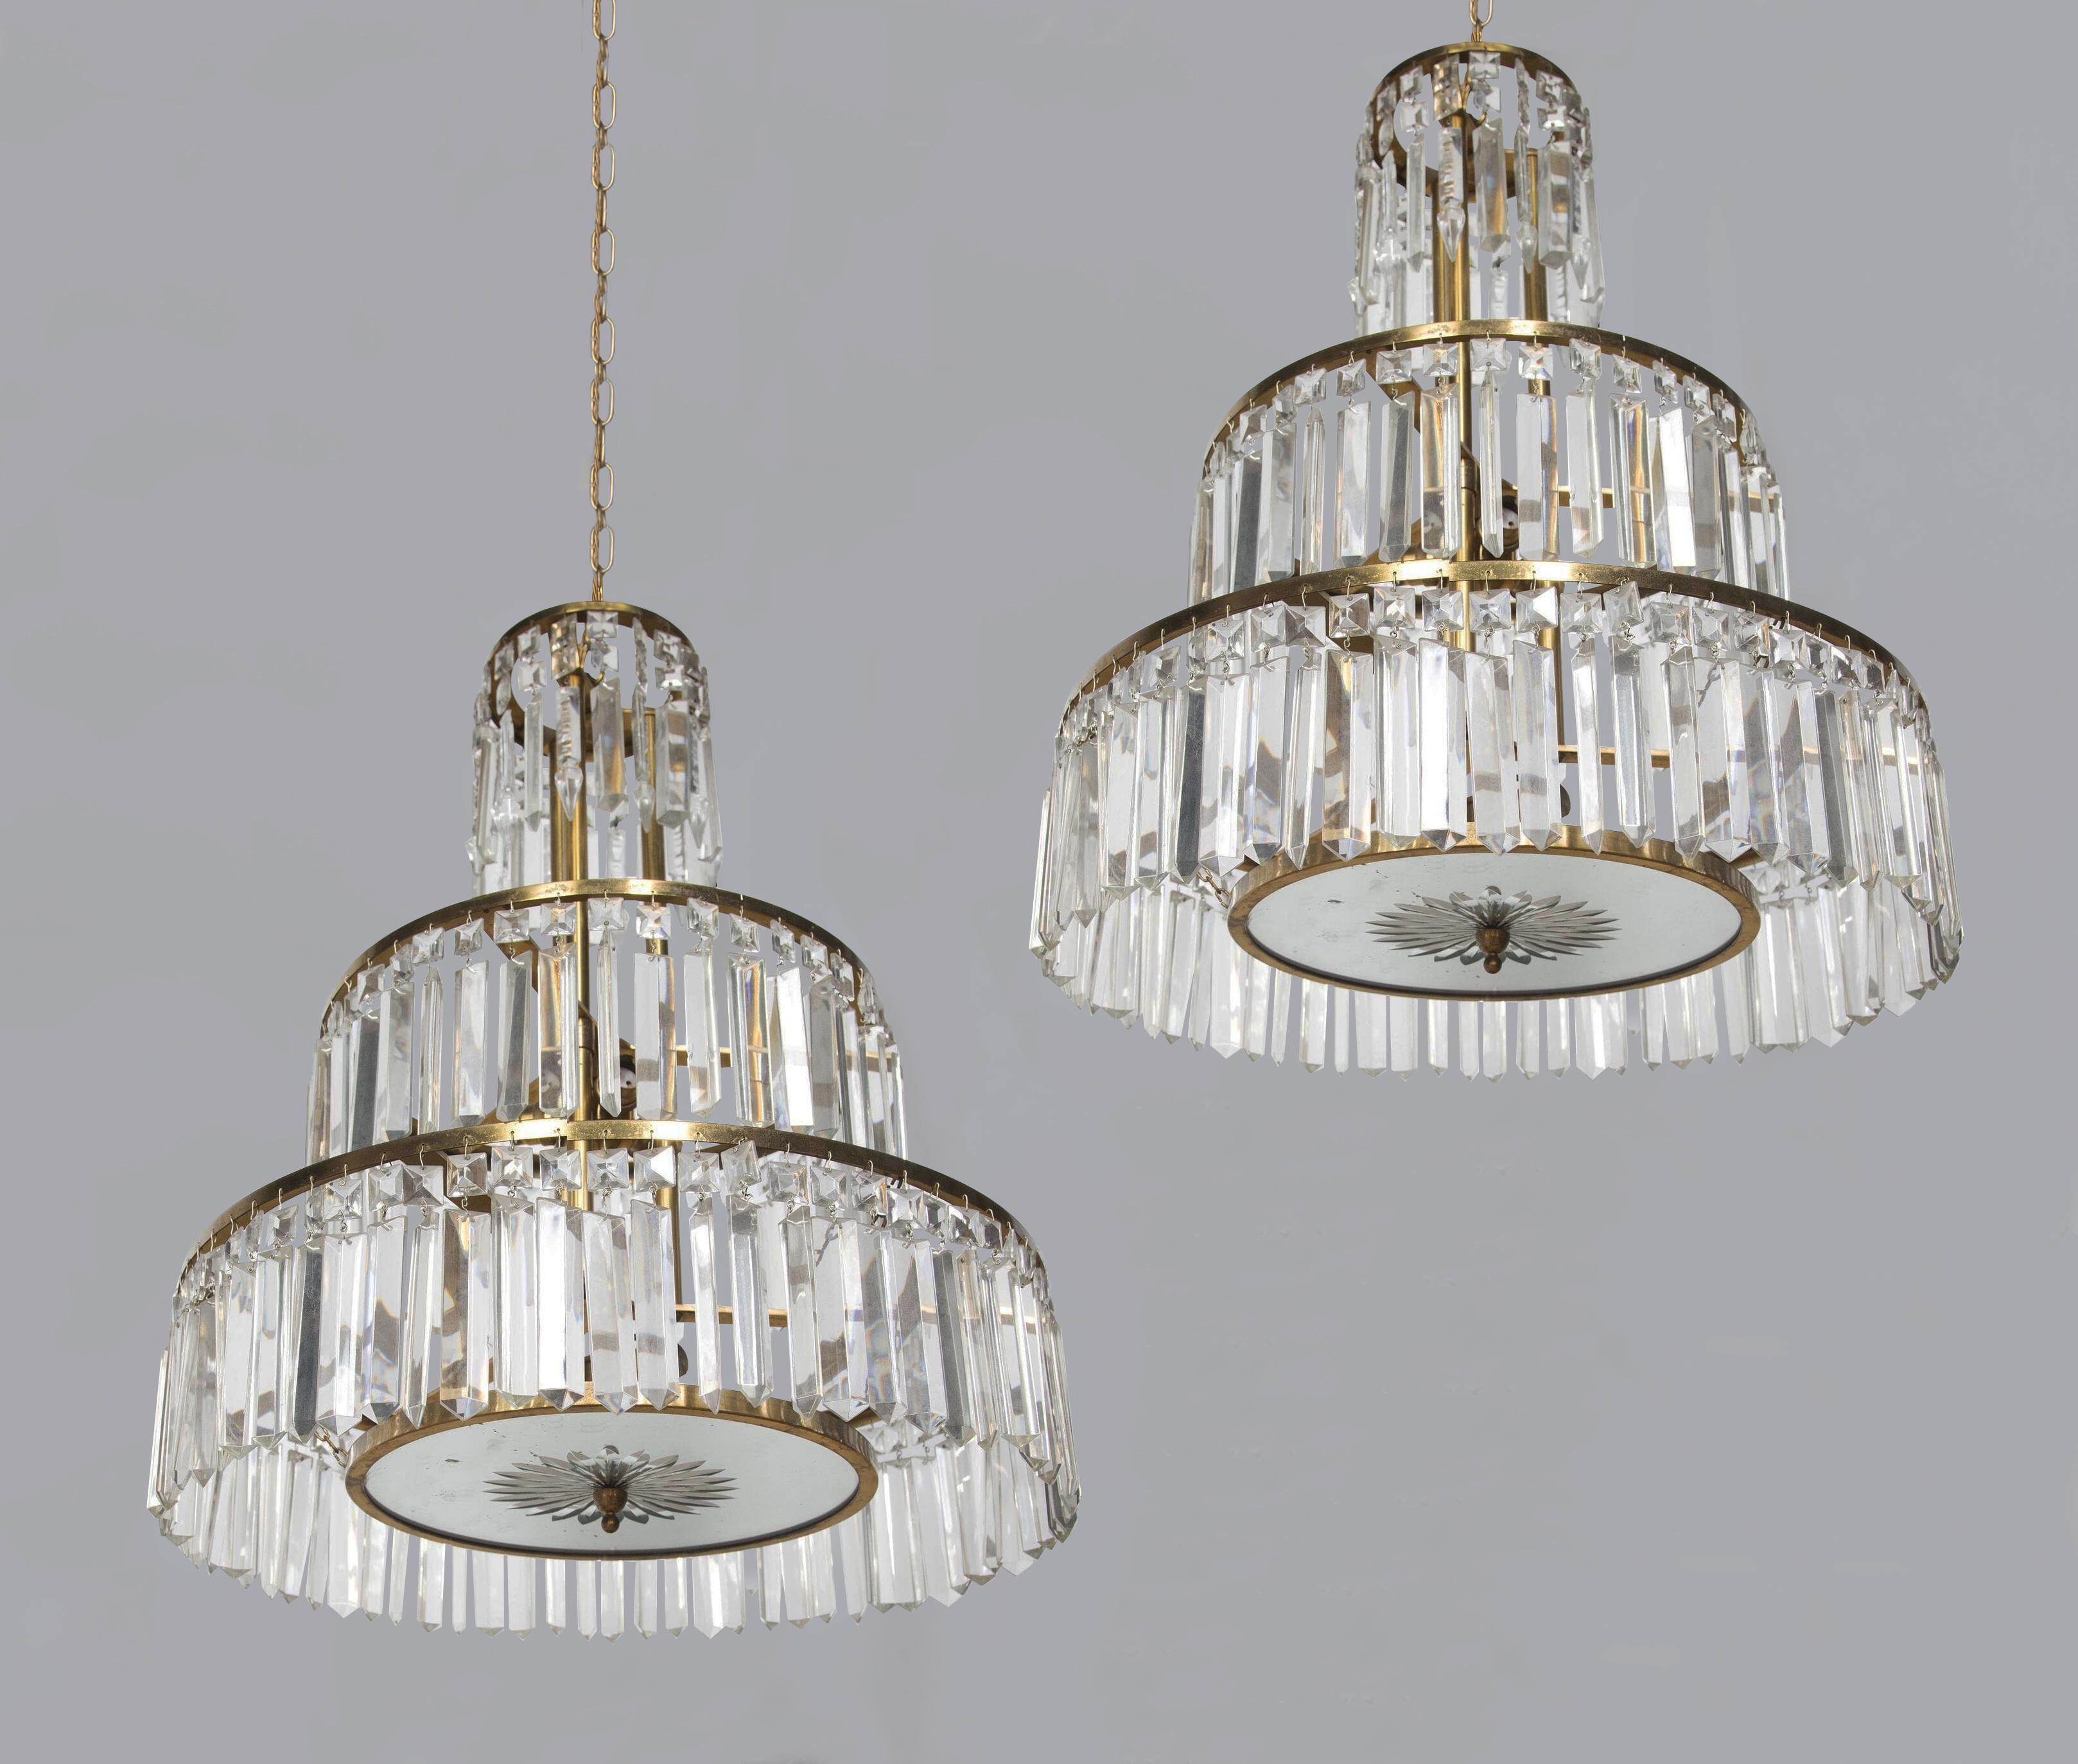 Incredibly stylish pair of matching super quality Italian mid-century 3-tier chandeliers.

With crystal prism drops hung from graduated brass circular rings ending with a circular mirrored dish with a cut glass star and brass finial. 

Chic,